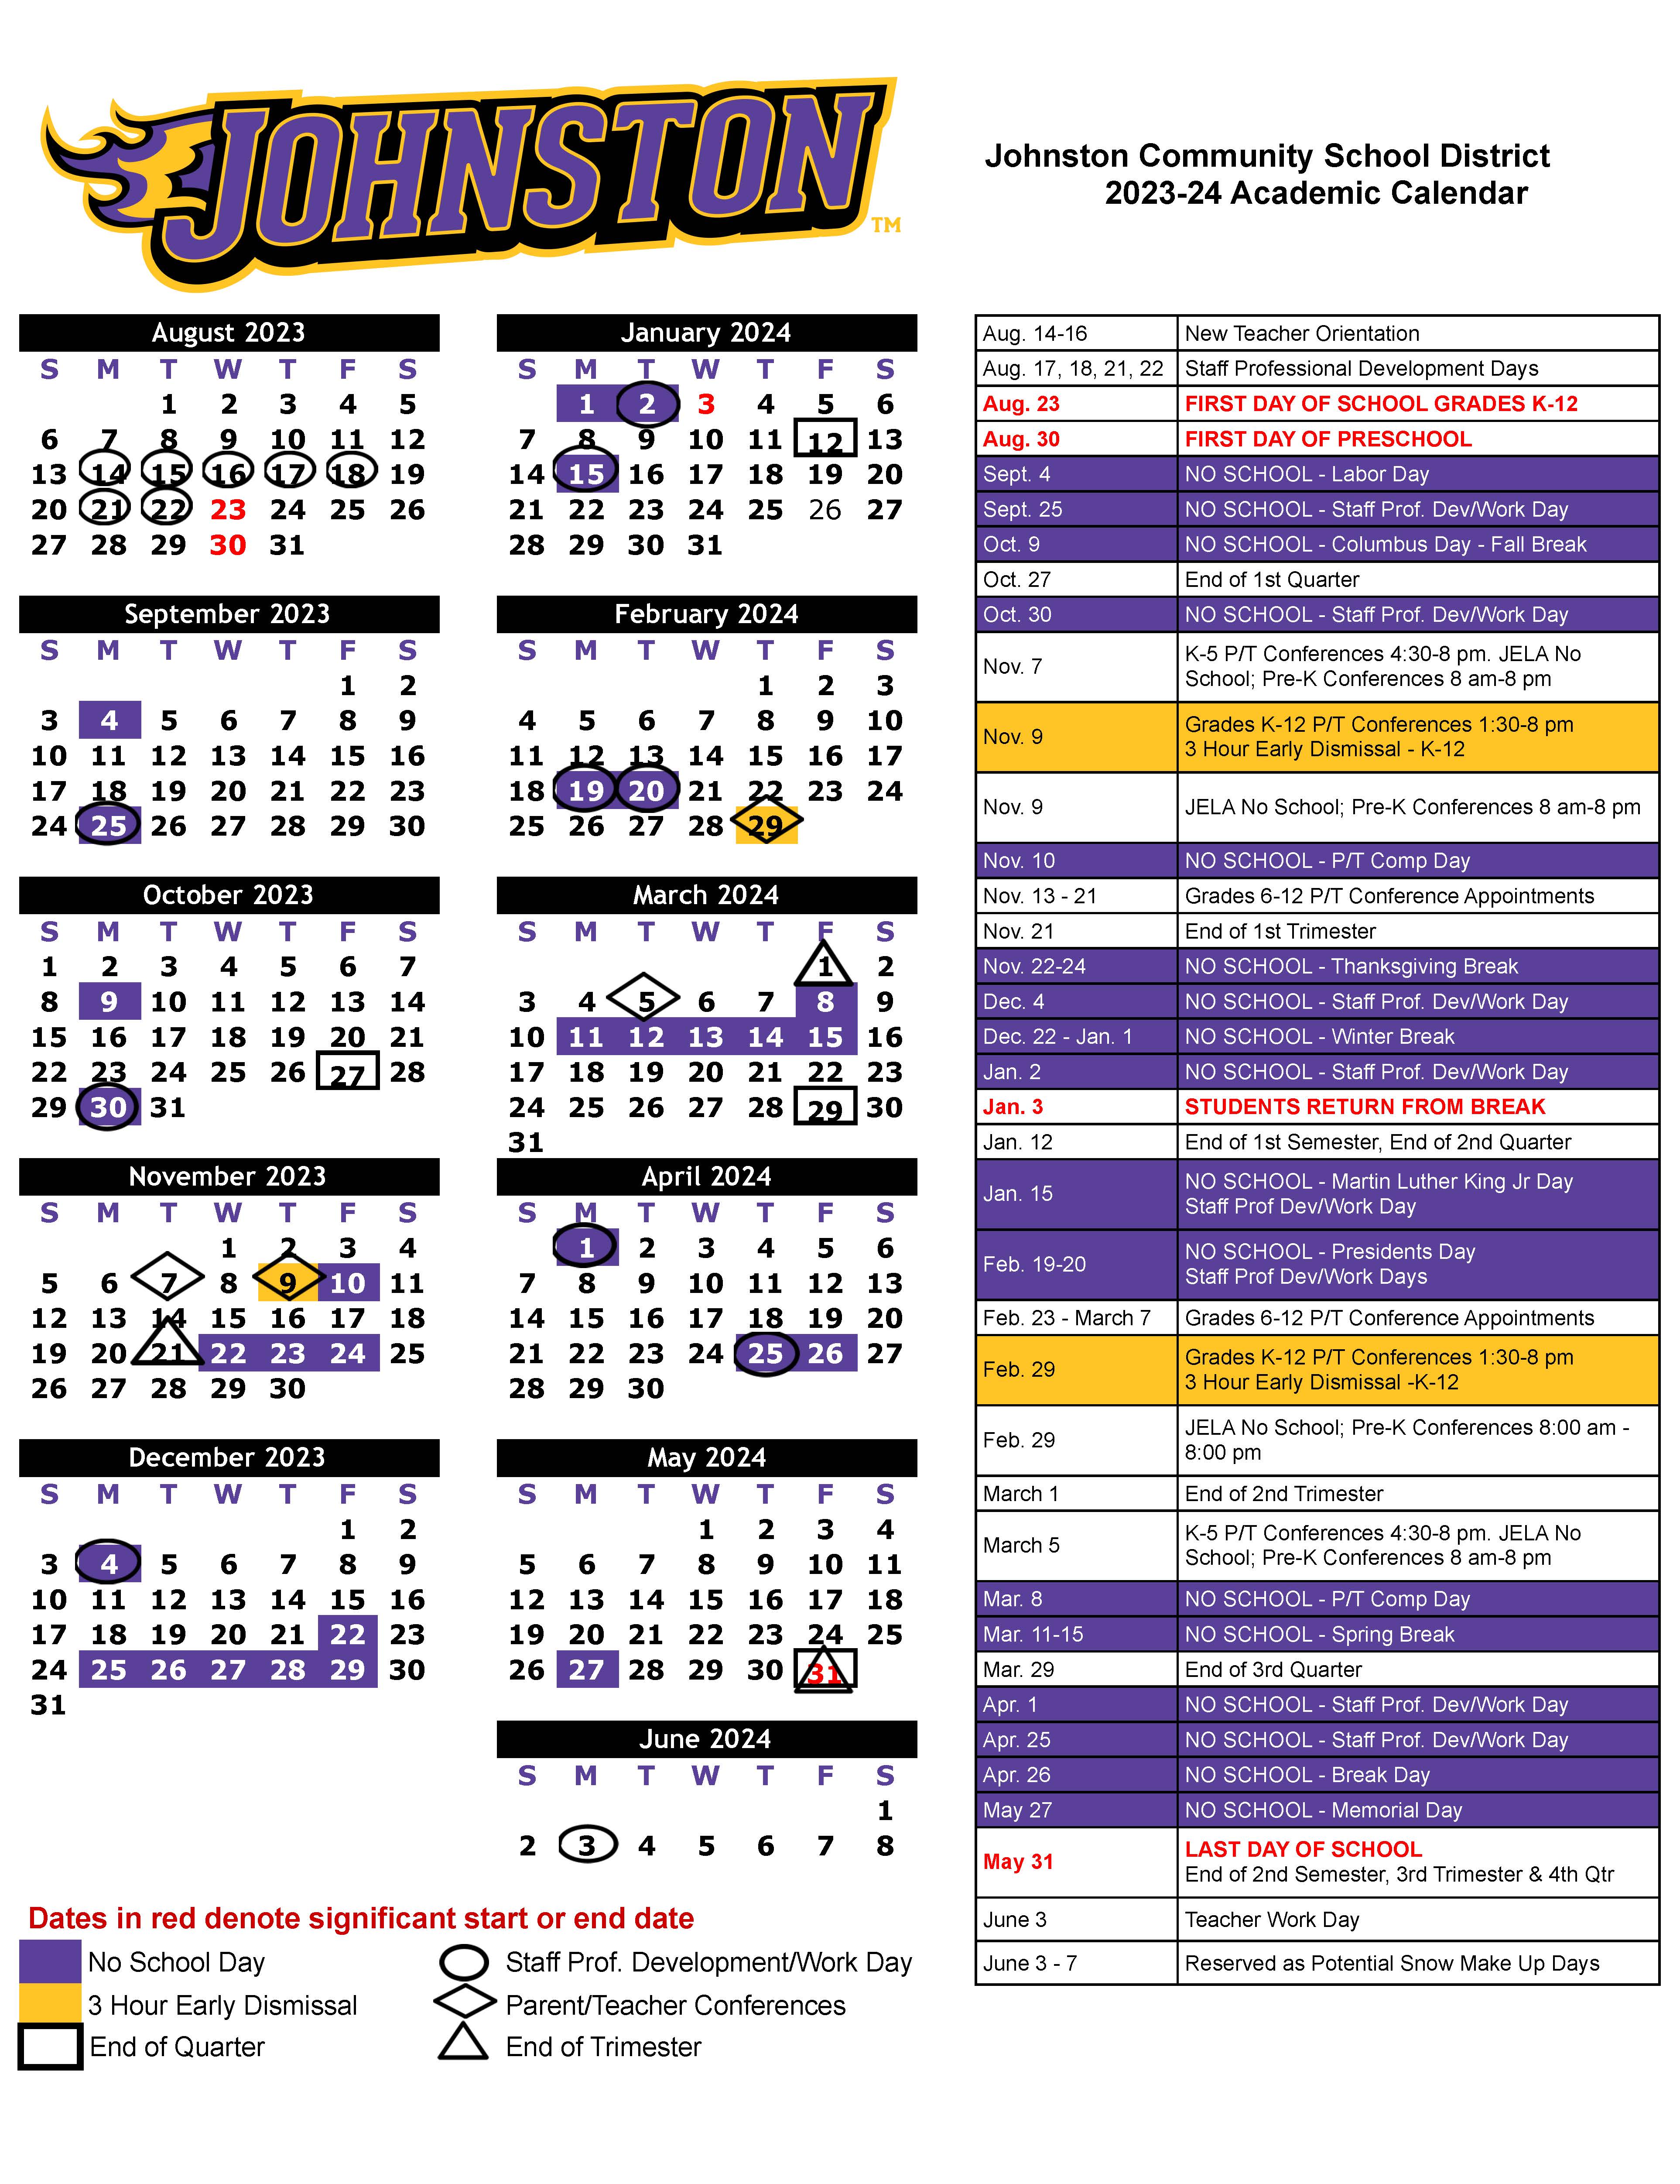 Academic Calendar approved for 2023-24 - Johnston Community School District